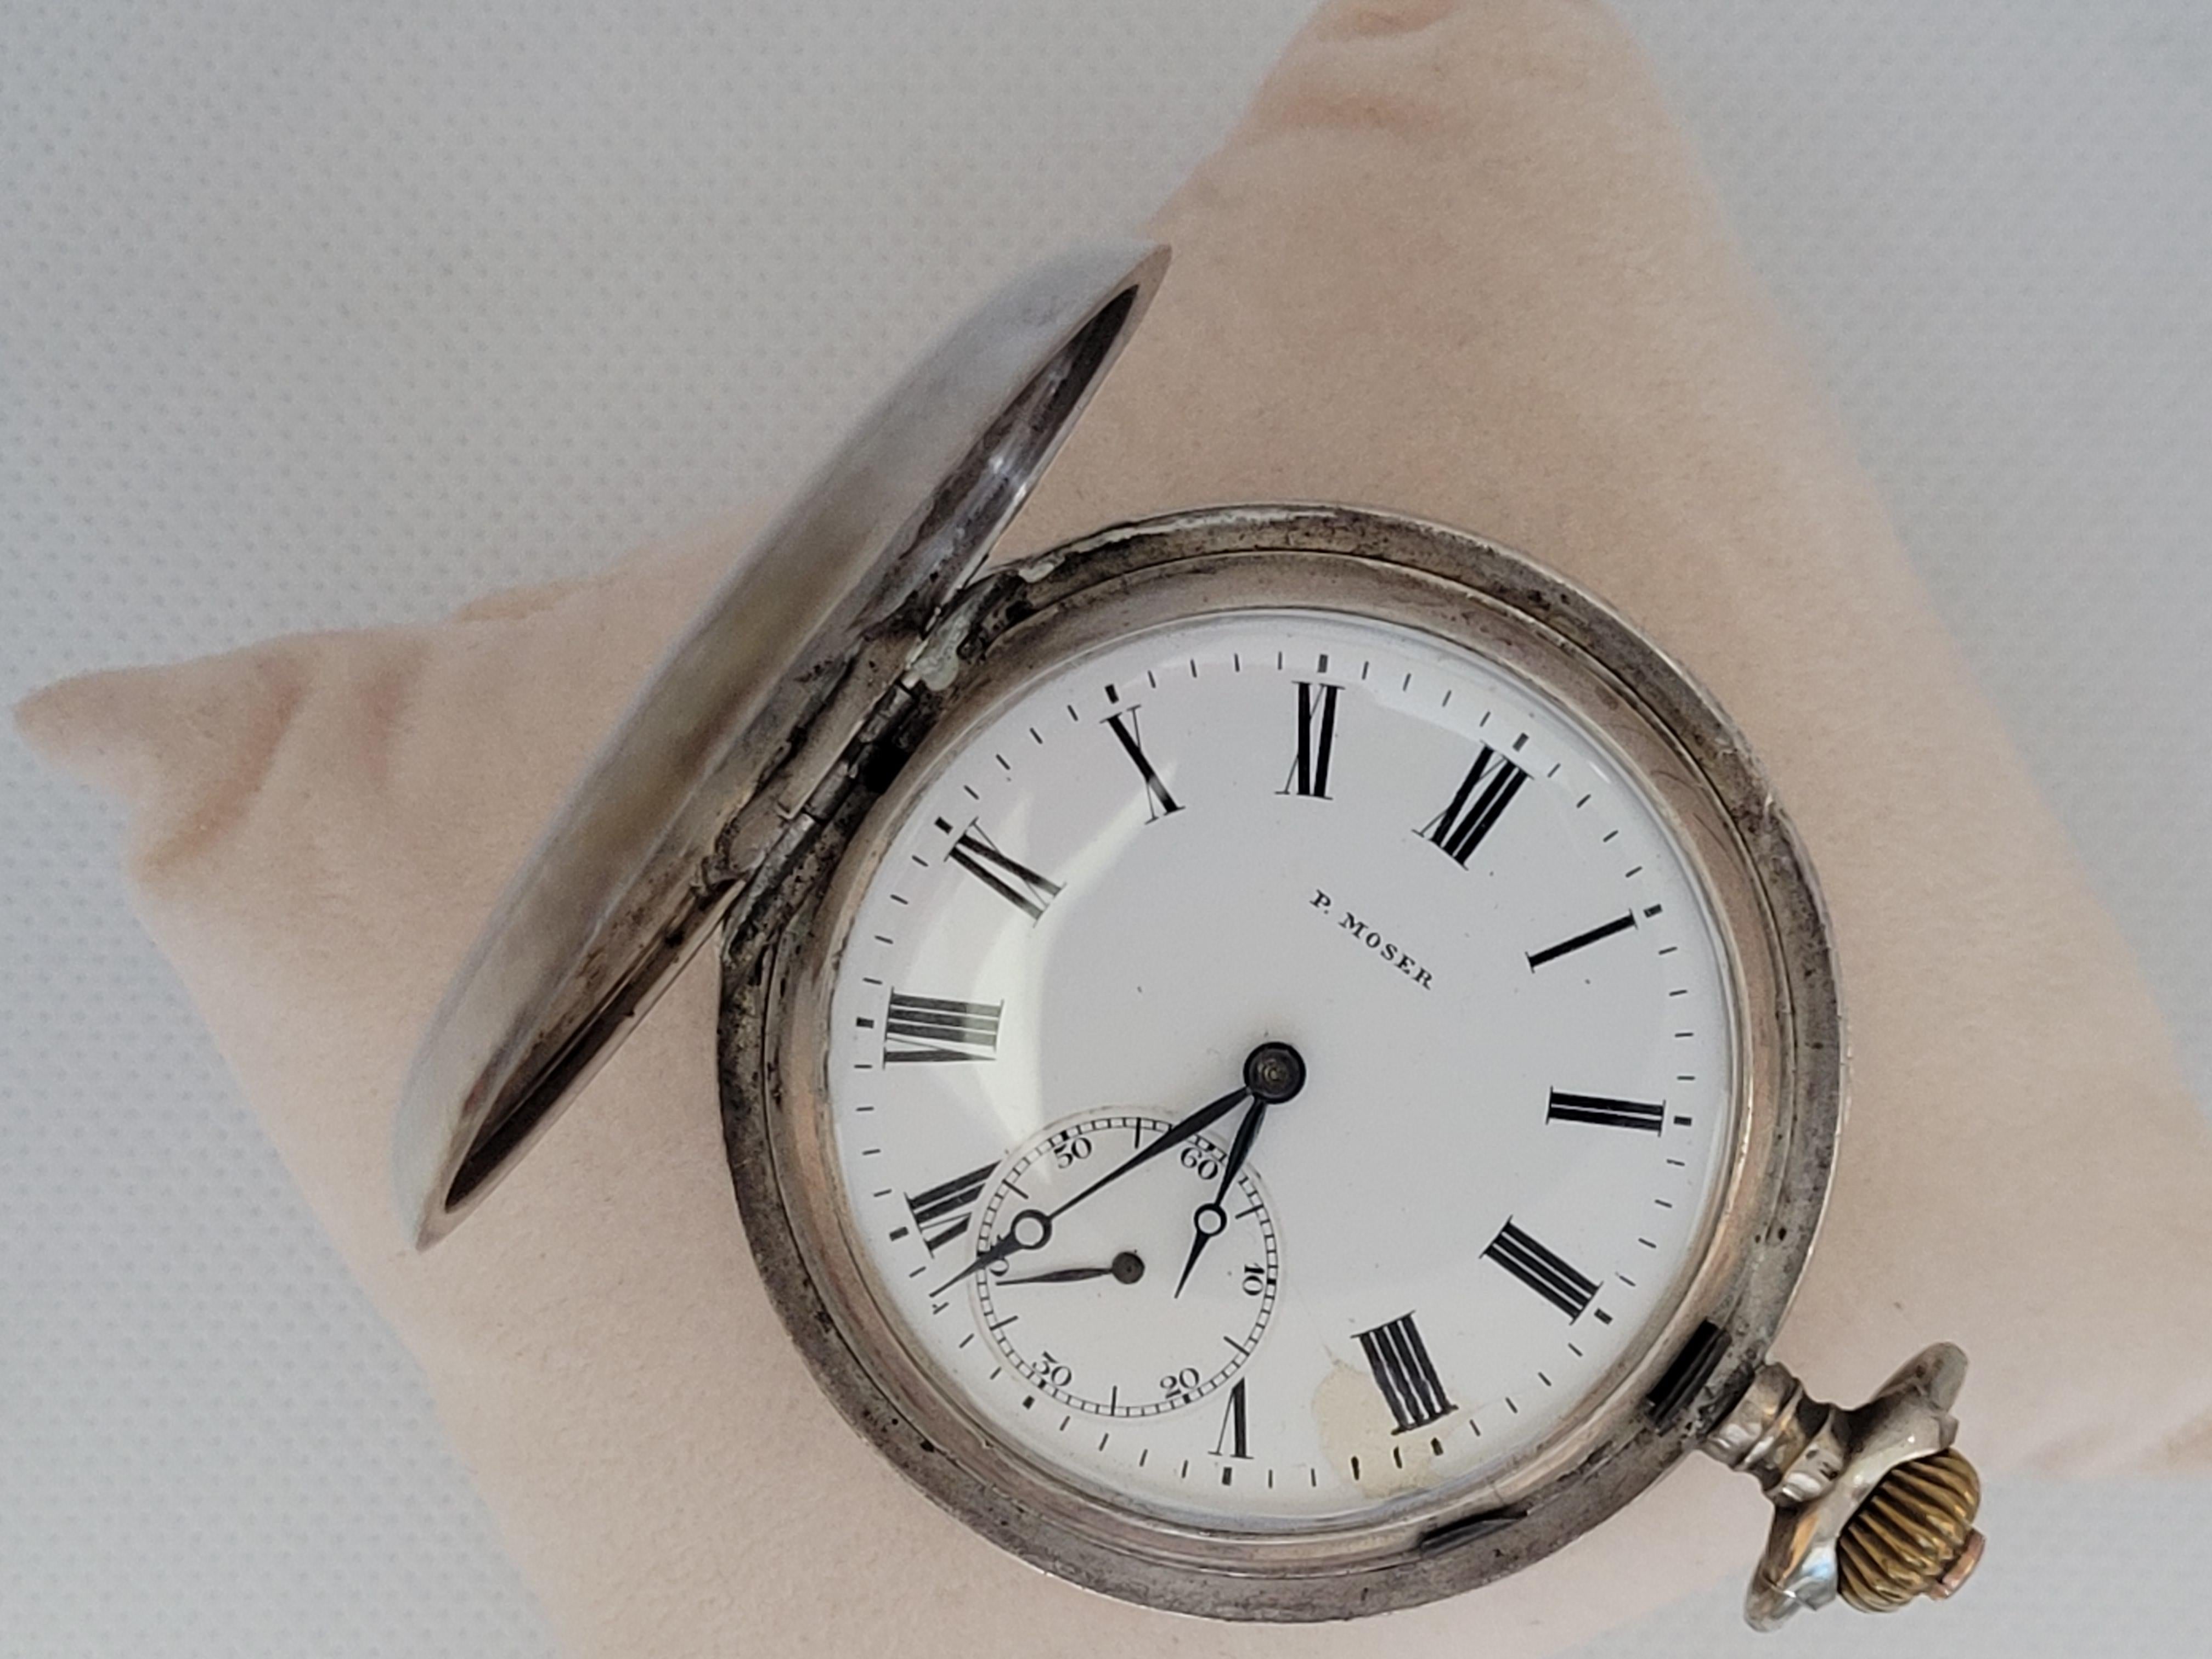 P Moser Pocket Watch Working Case Year 1910 Swiss Made 875 Silver at ...